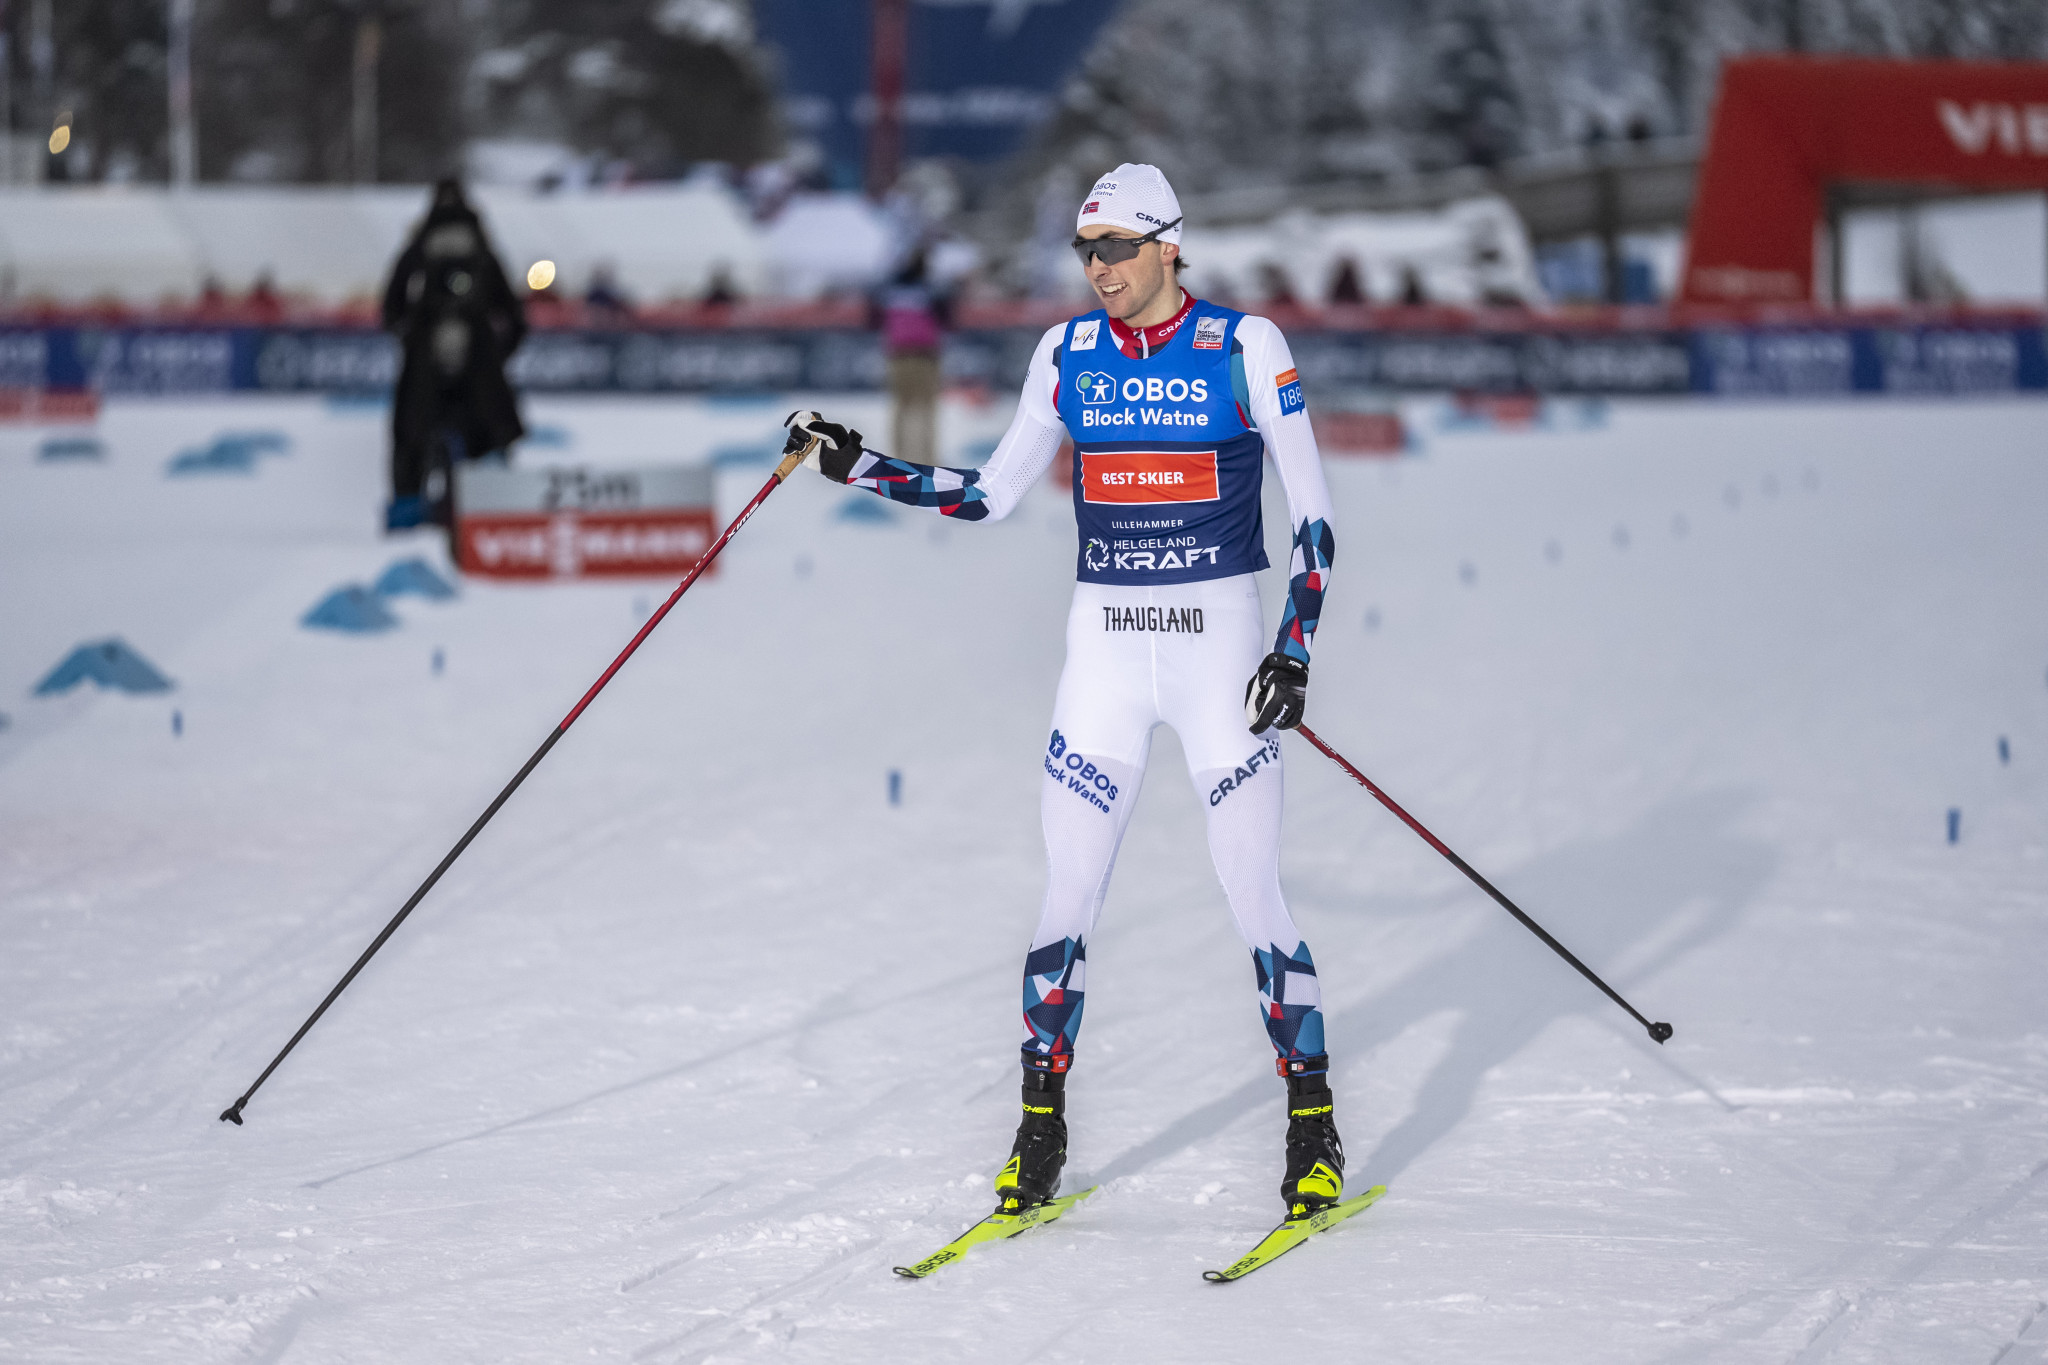 Riiber wins in Lillehammer on 100th Nordic Combined World Cup start